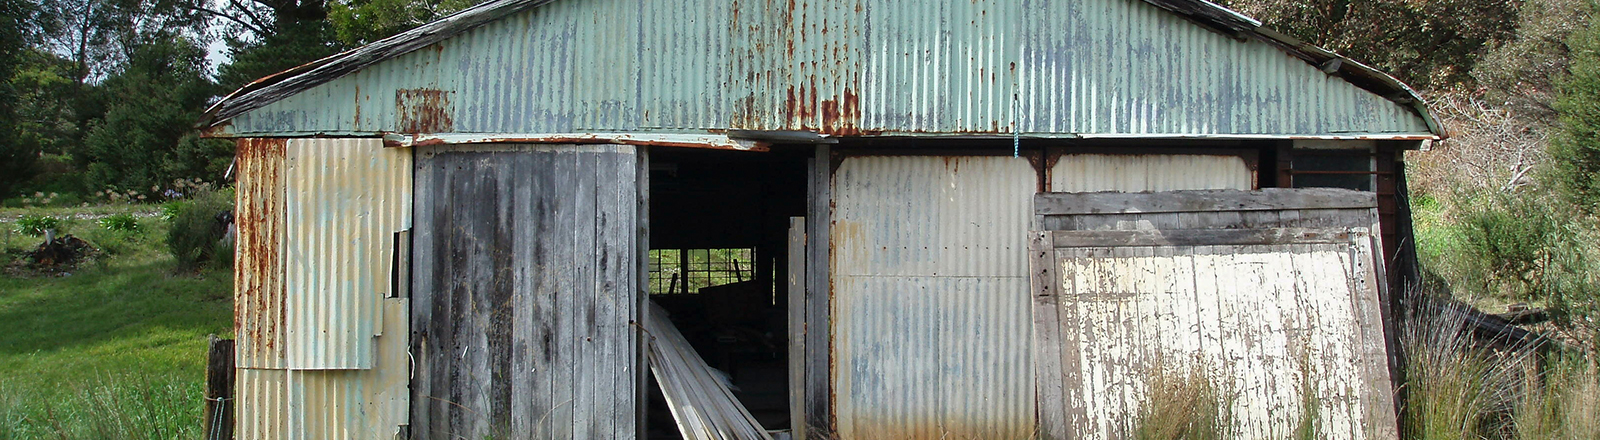 old shed 1600x440